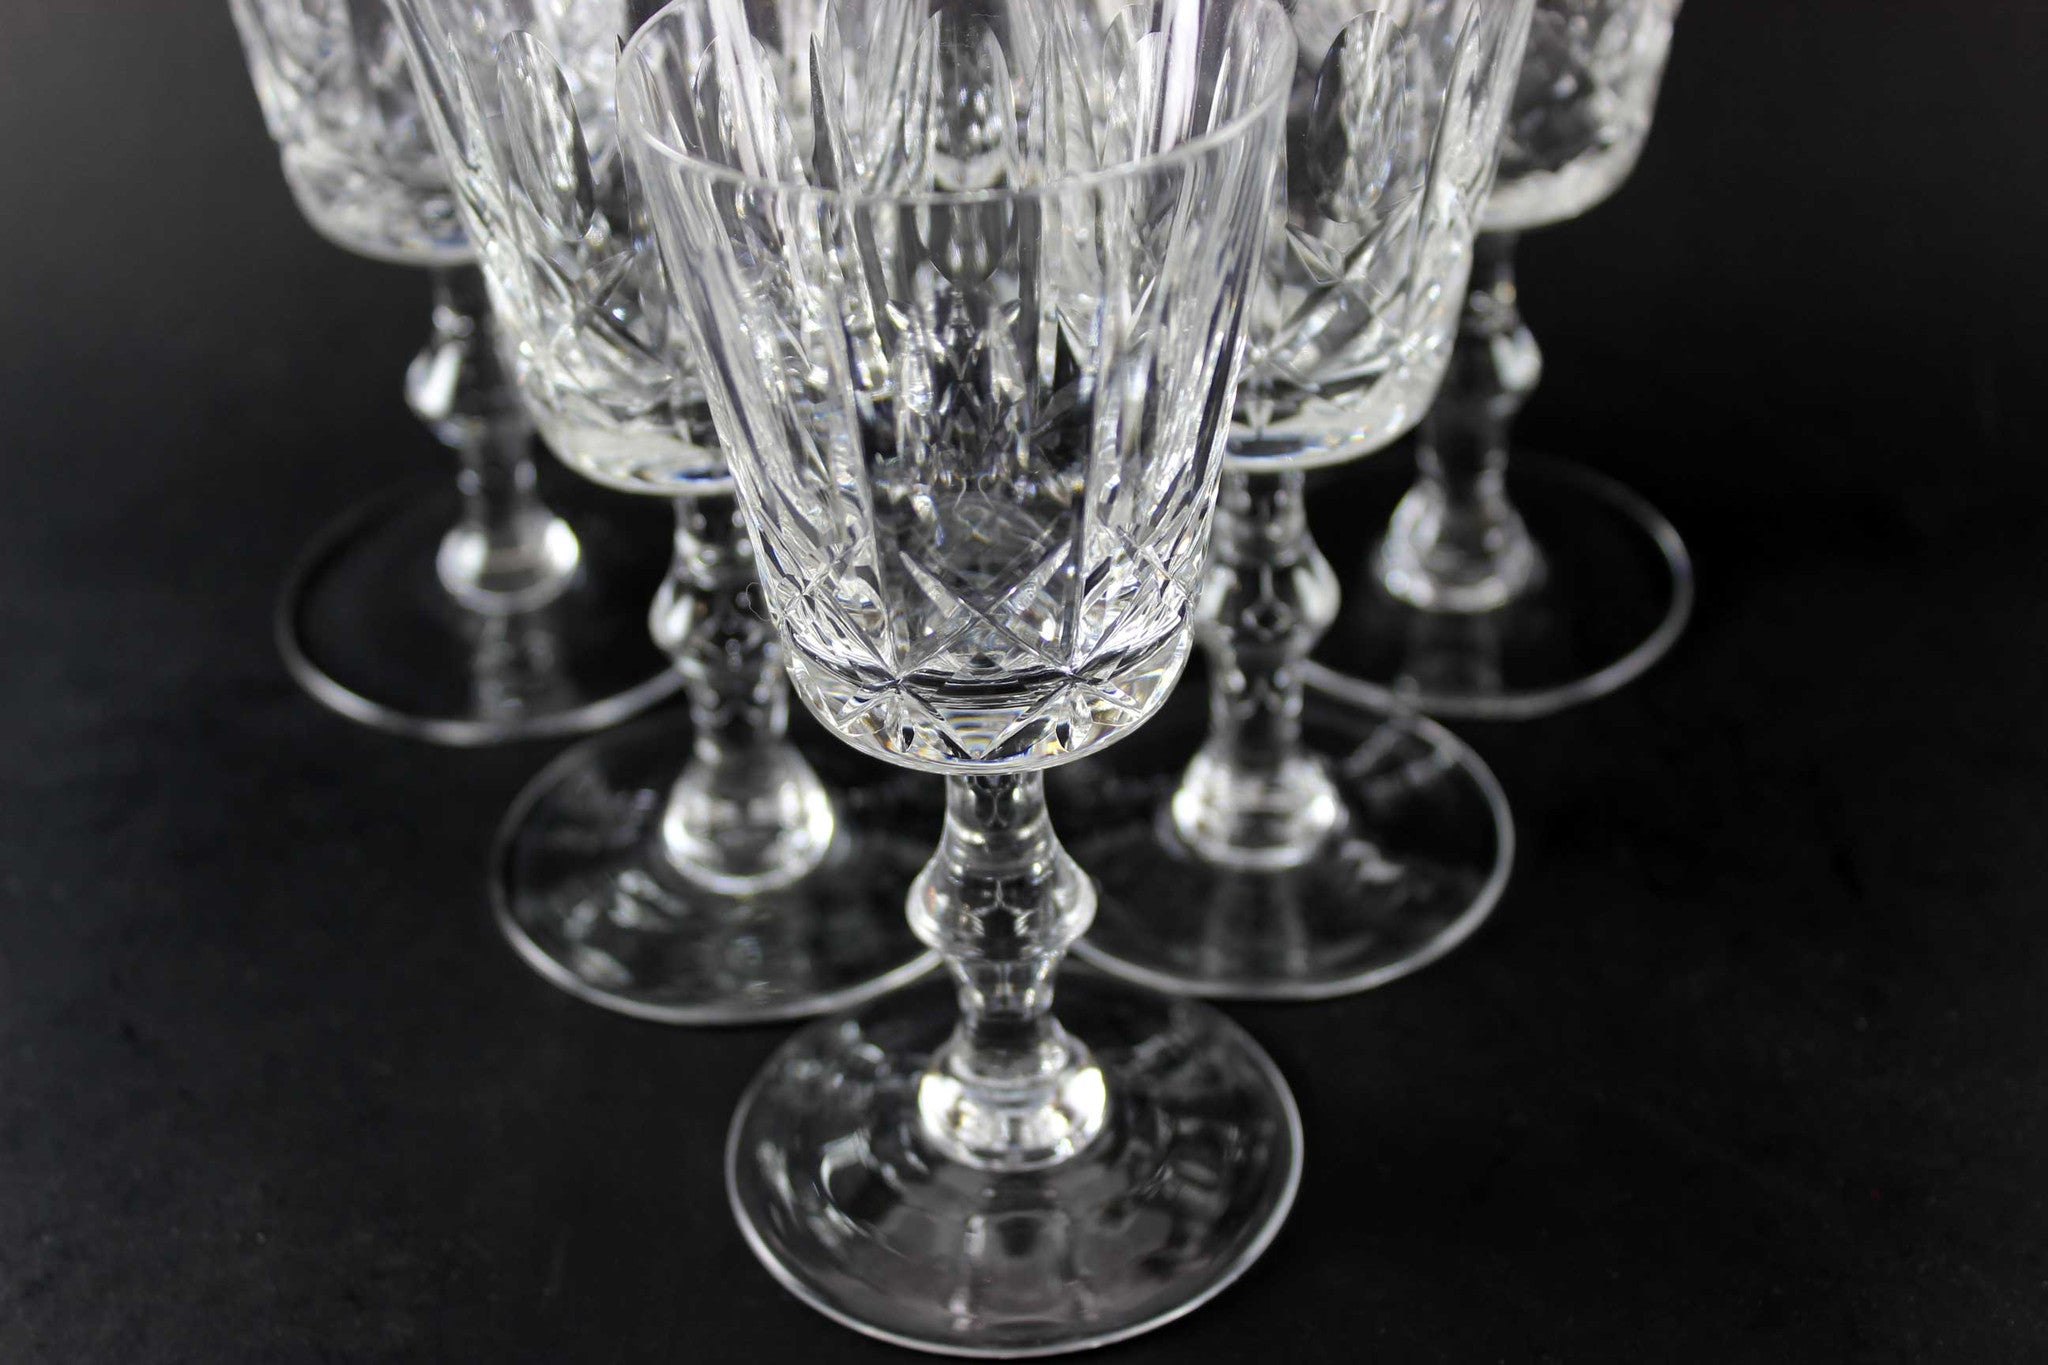 Cross and Olive Crystal Sherry/Port Glasses